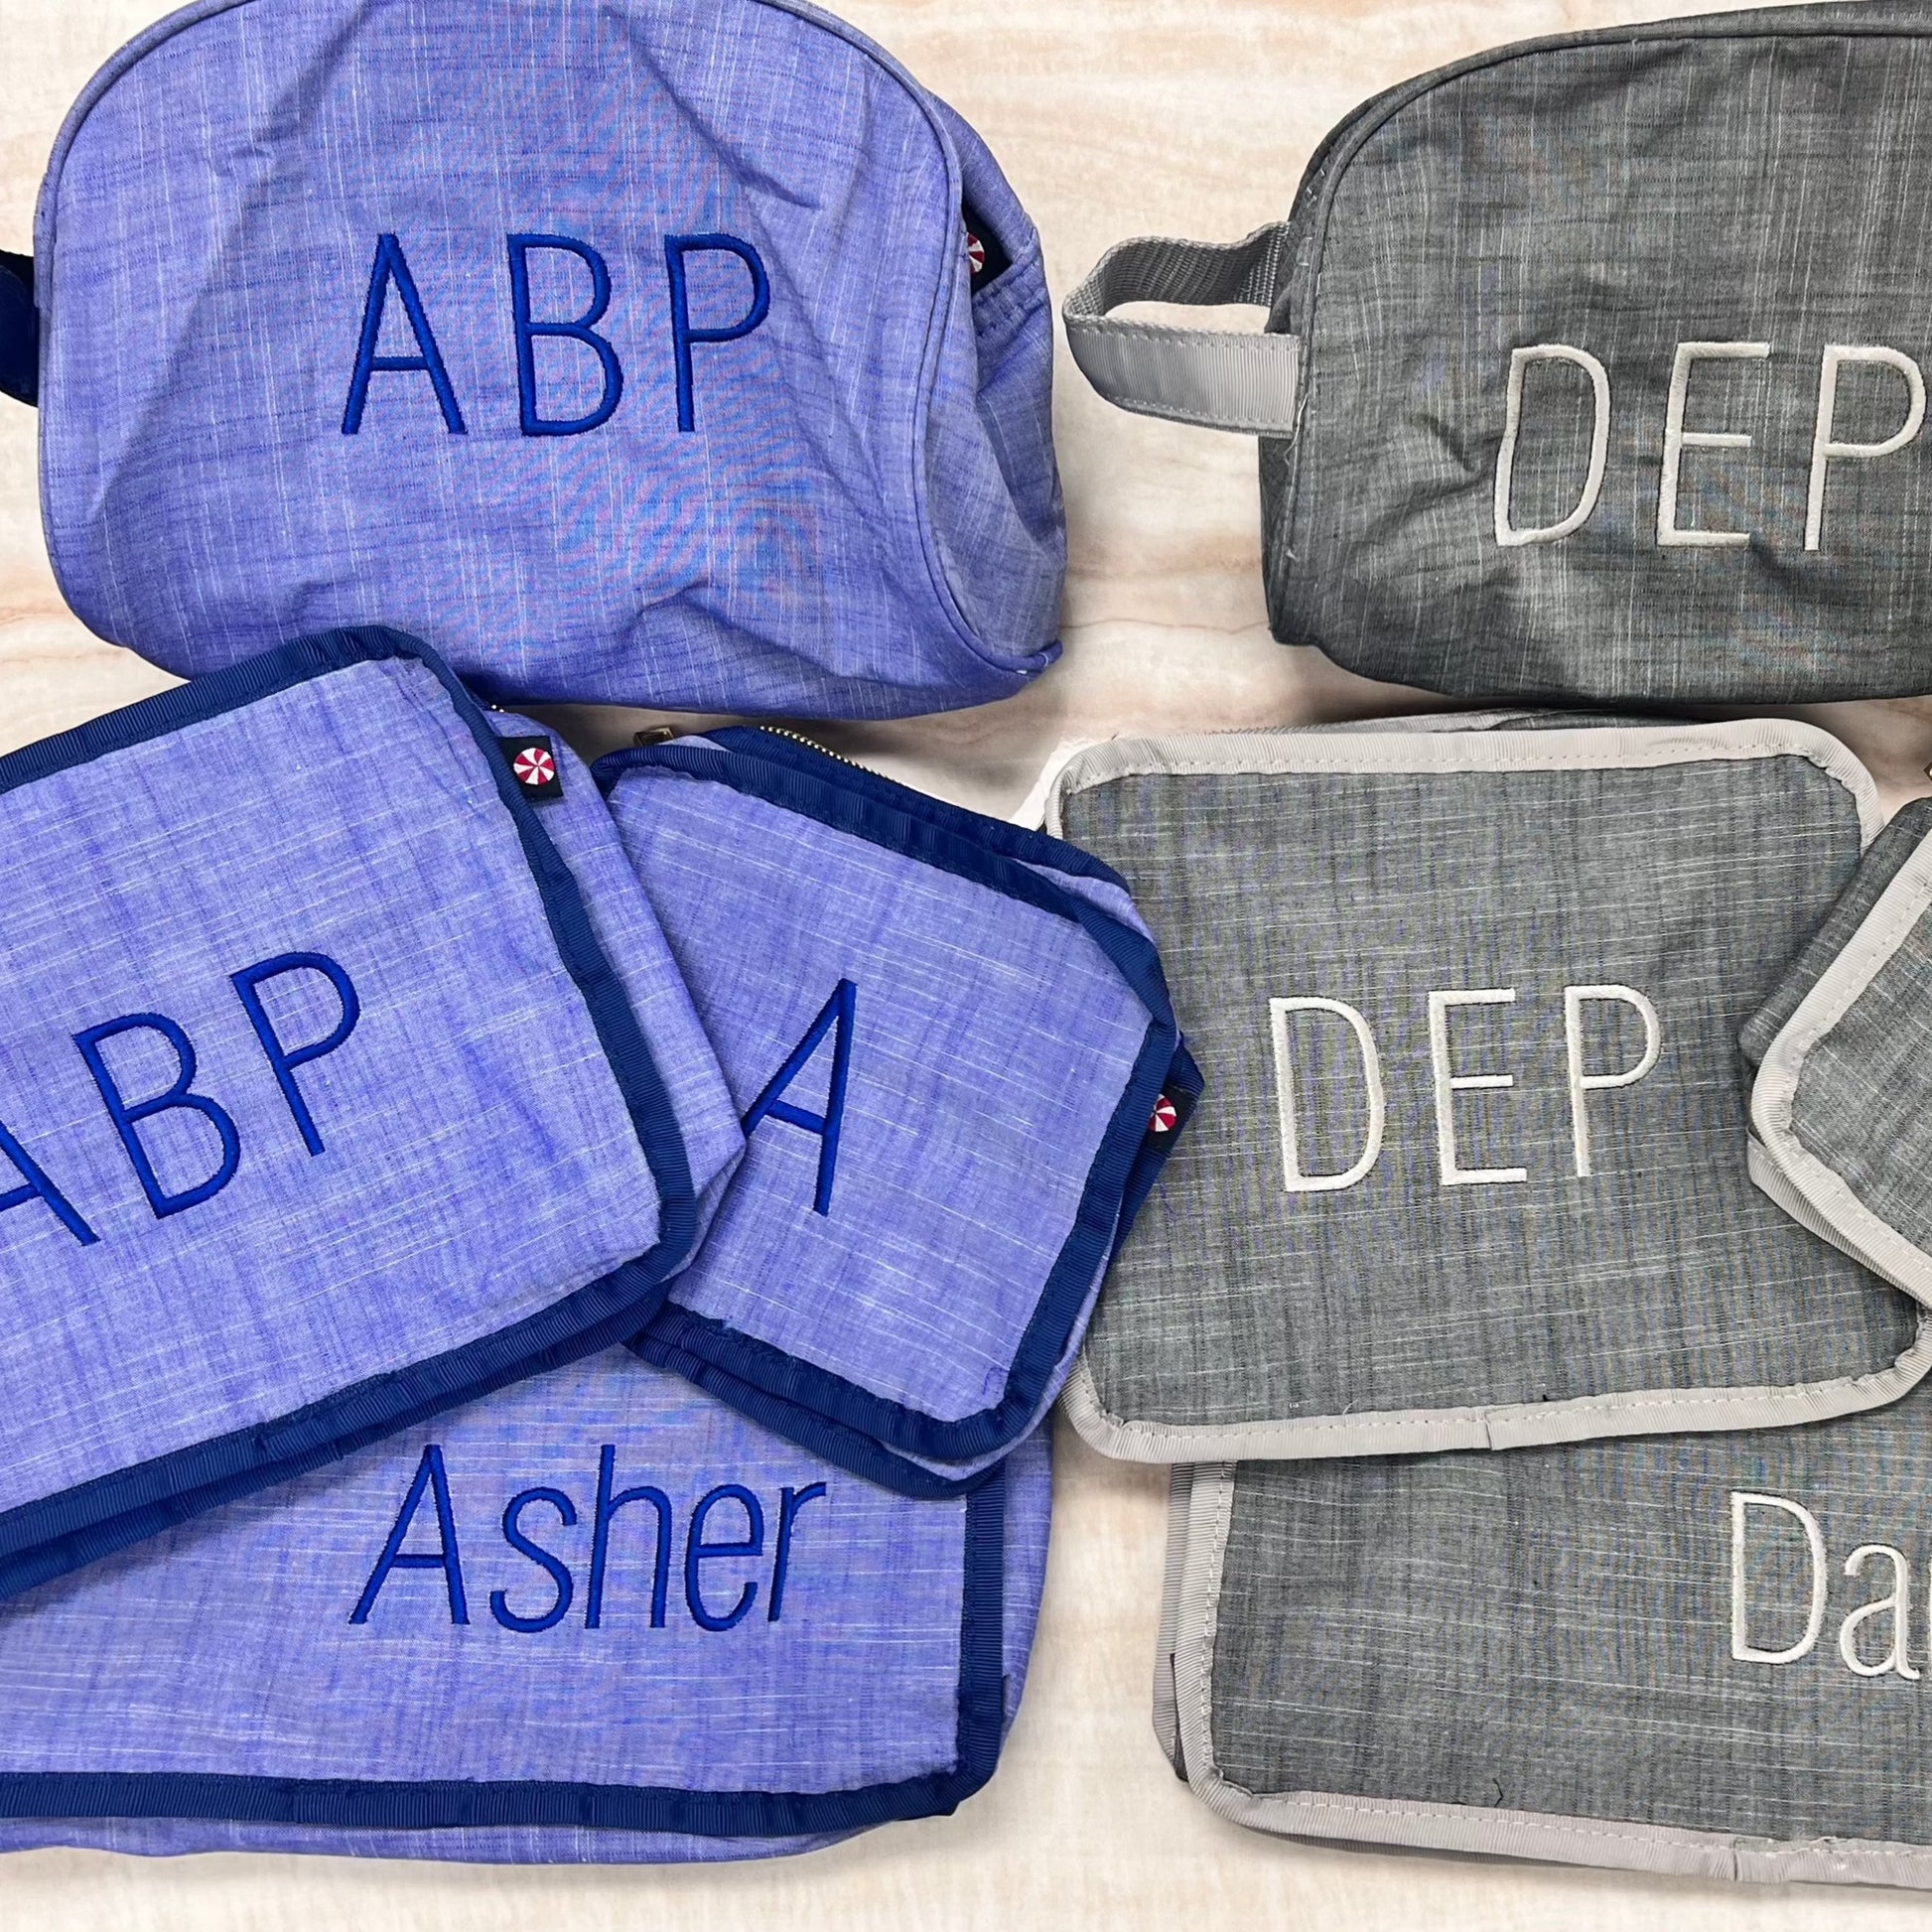 Personalized Chambray Blue Navy Traveler Pouch - Give Wink